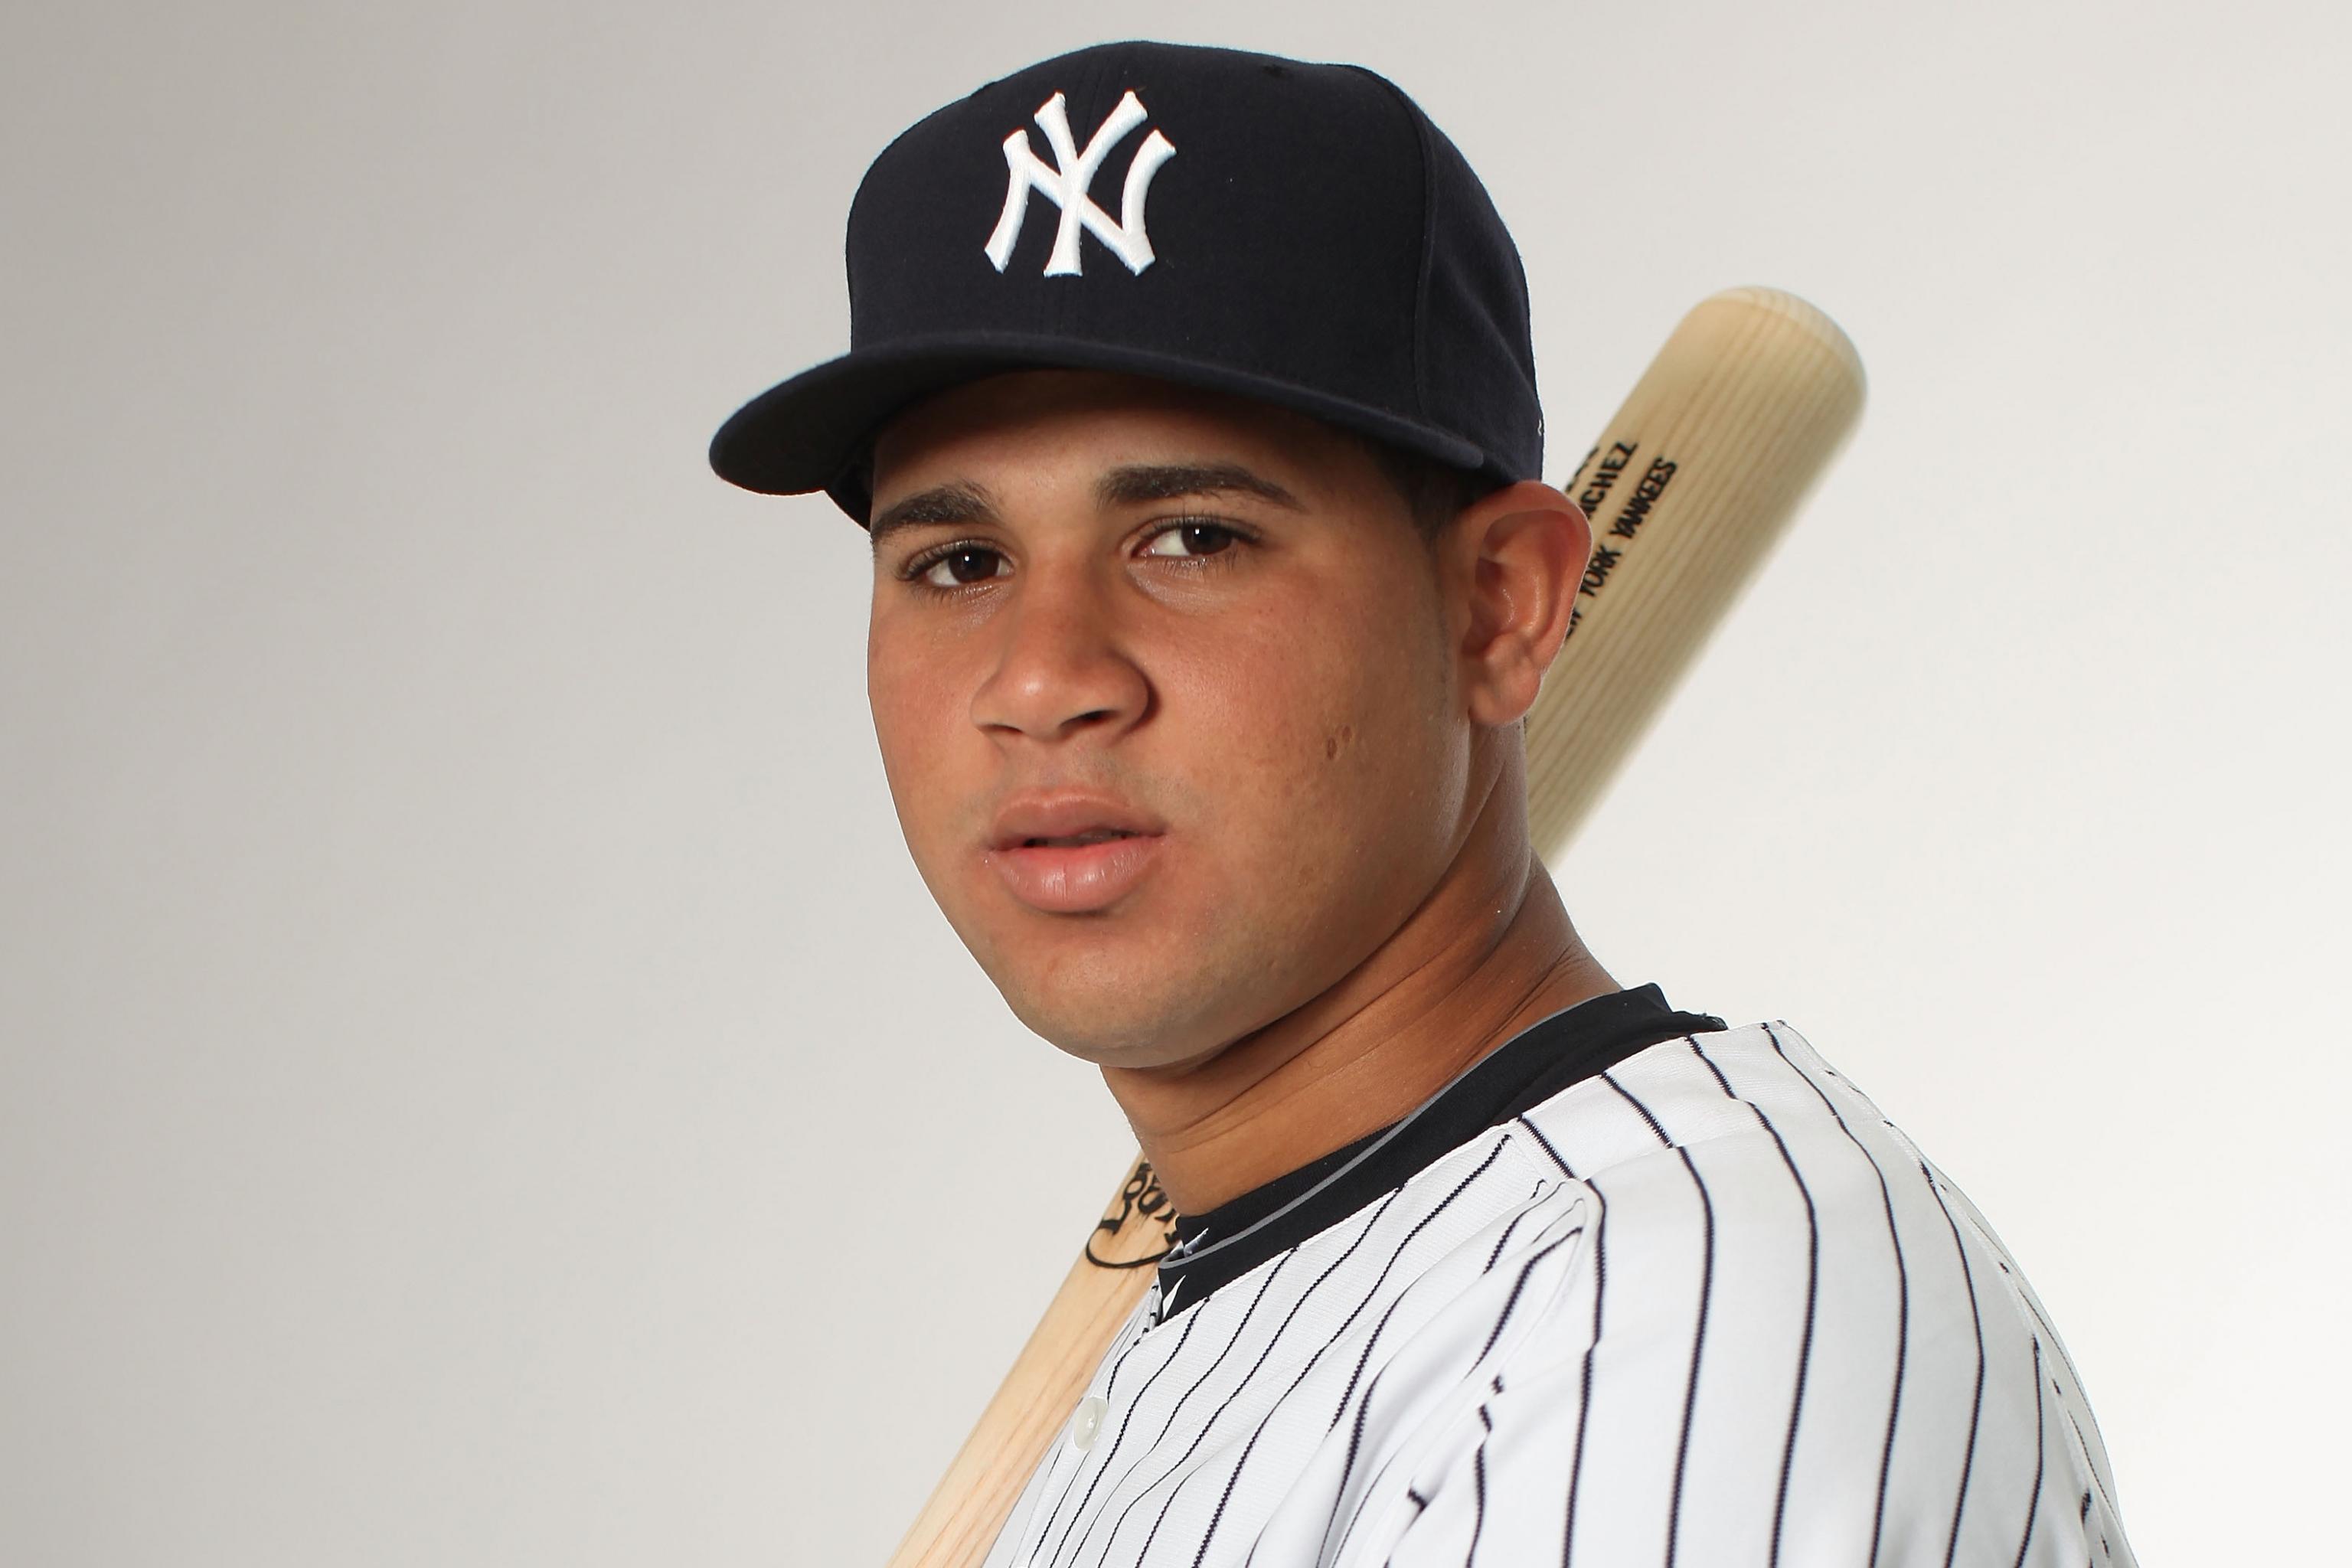 Believe the hype: Yankees catcher Gary Sanchez might be the real deal, MLB